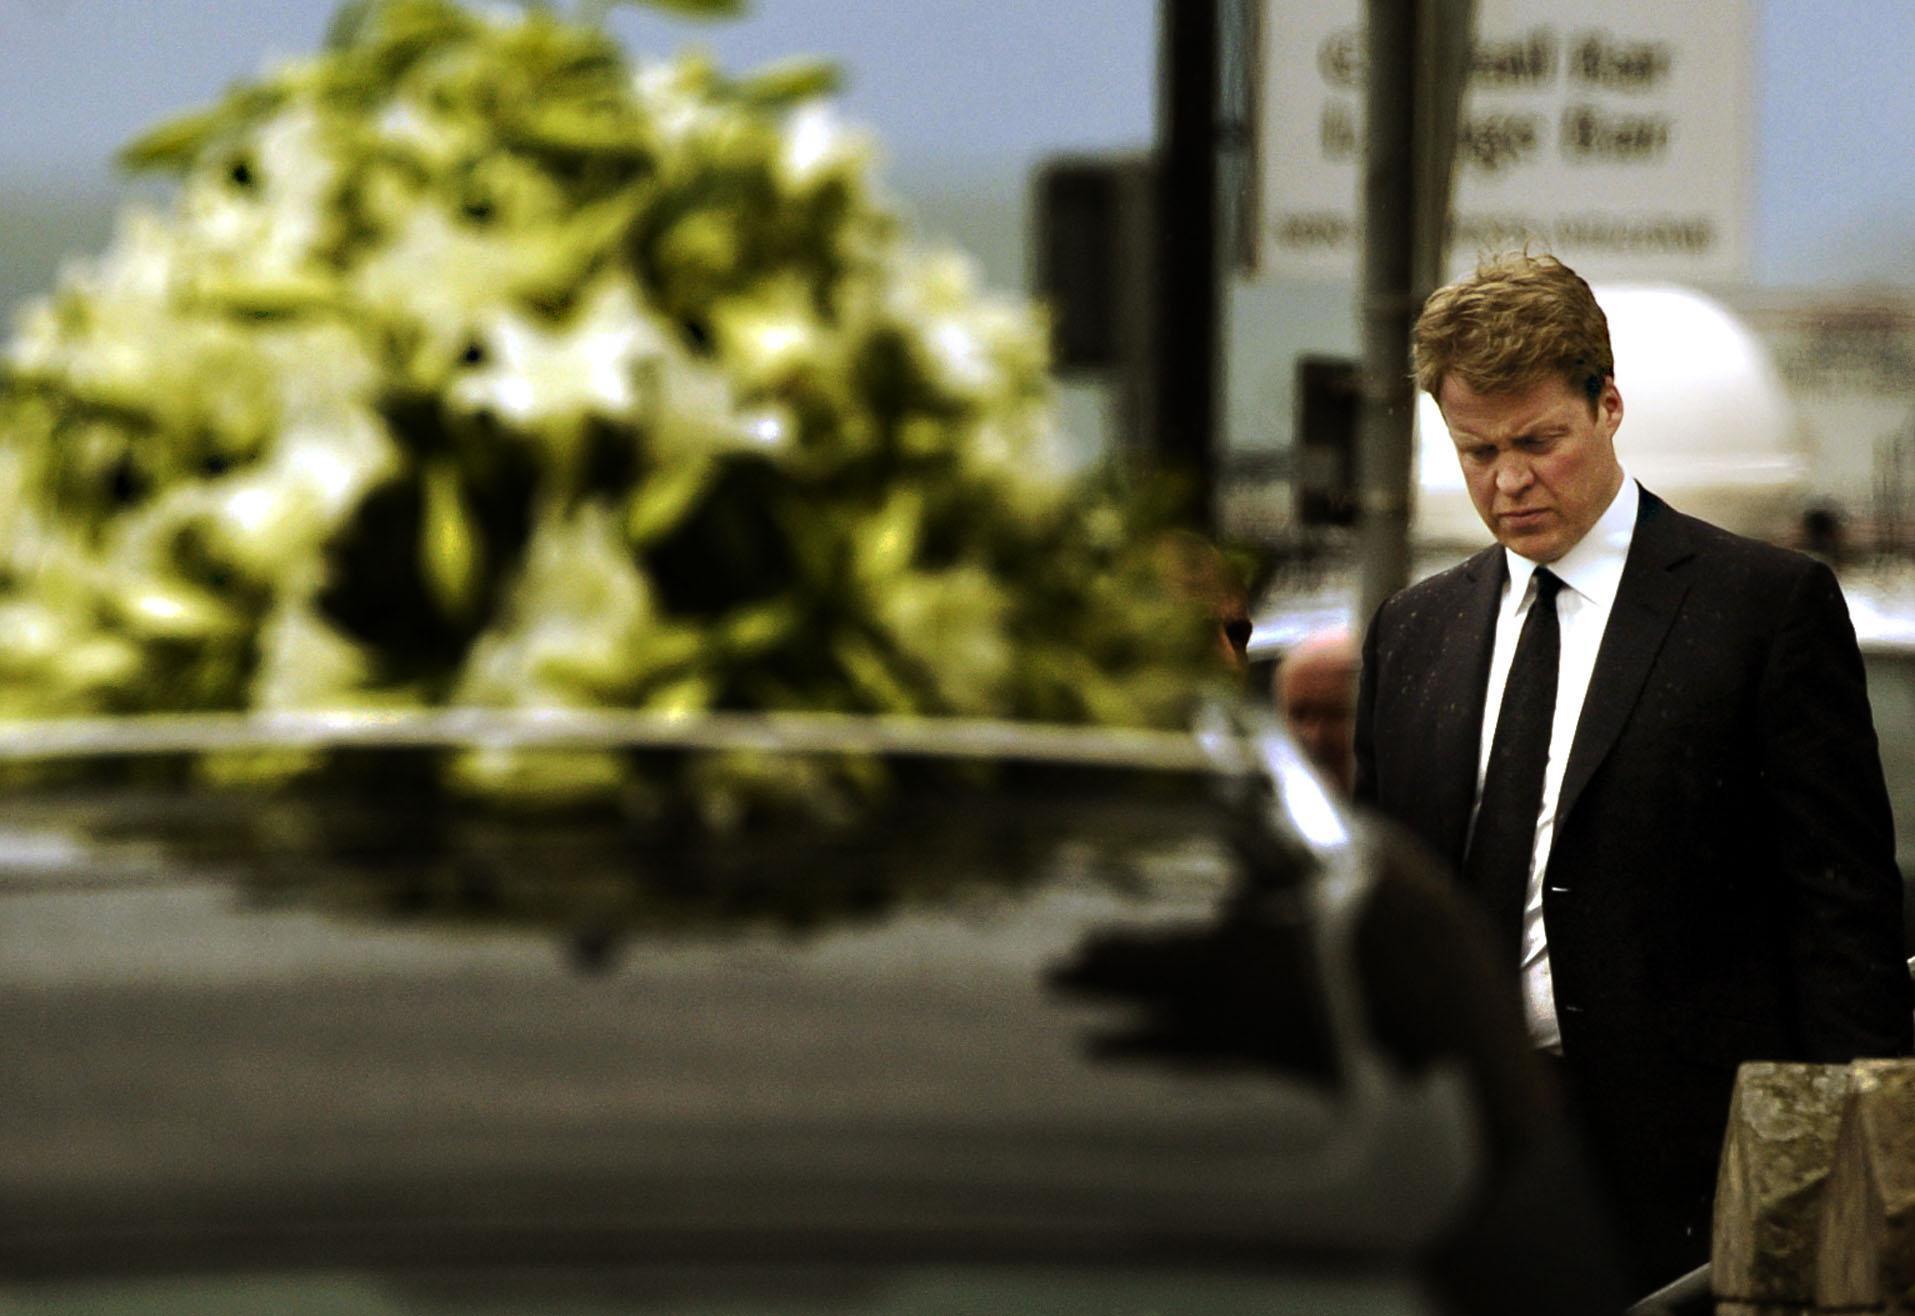 Earl Spencer at his sister, Princess Diana's funeral on September 6, 1997 | Source: Getty Images